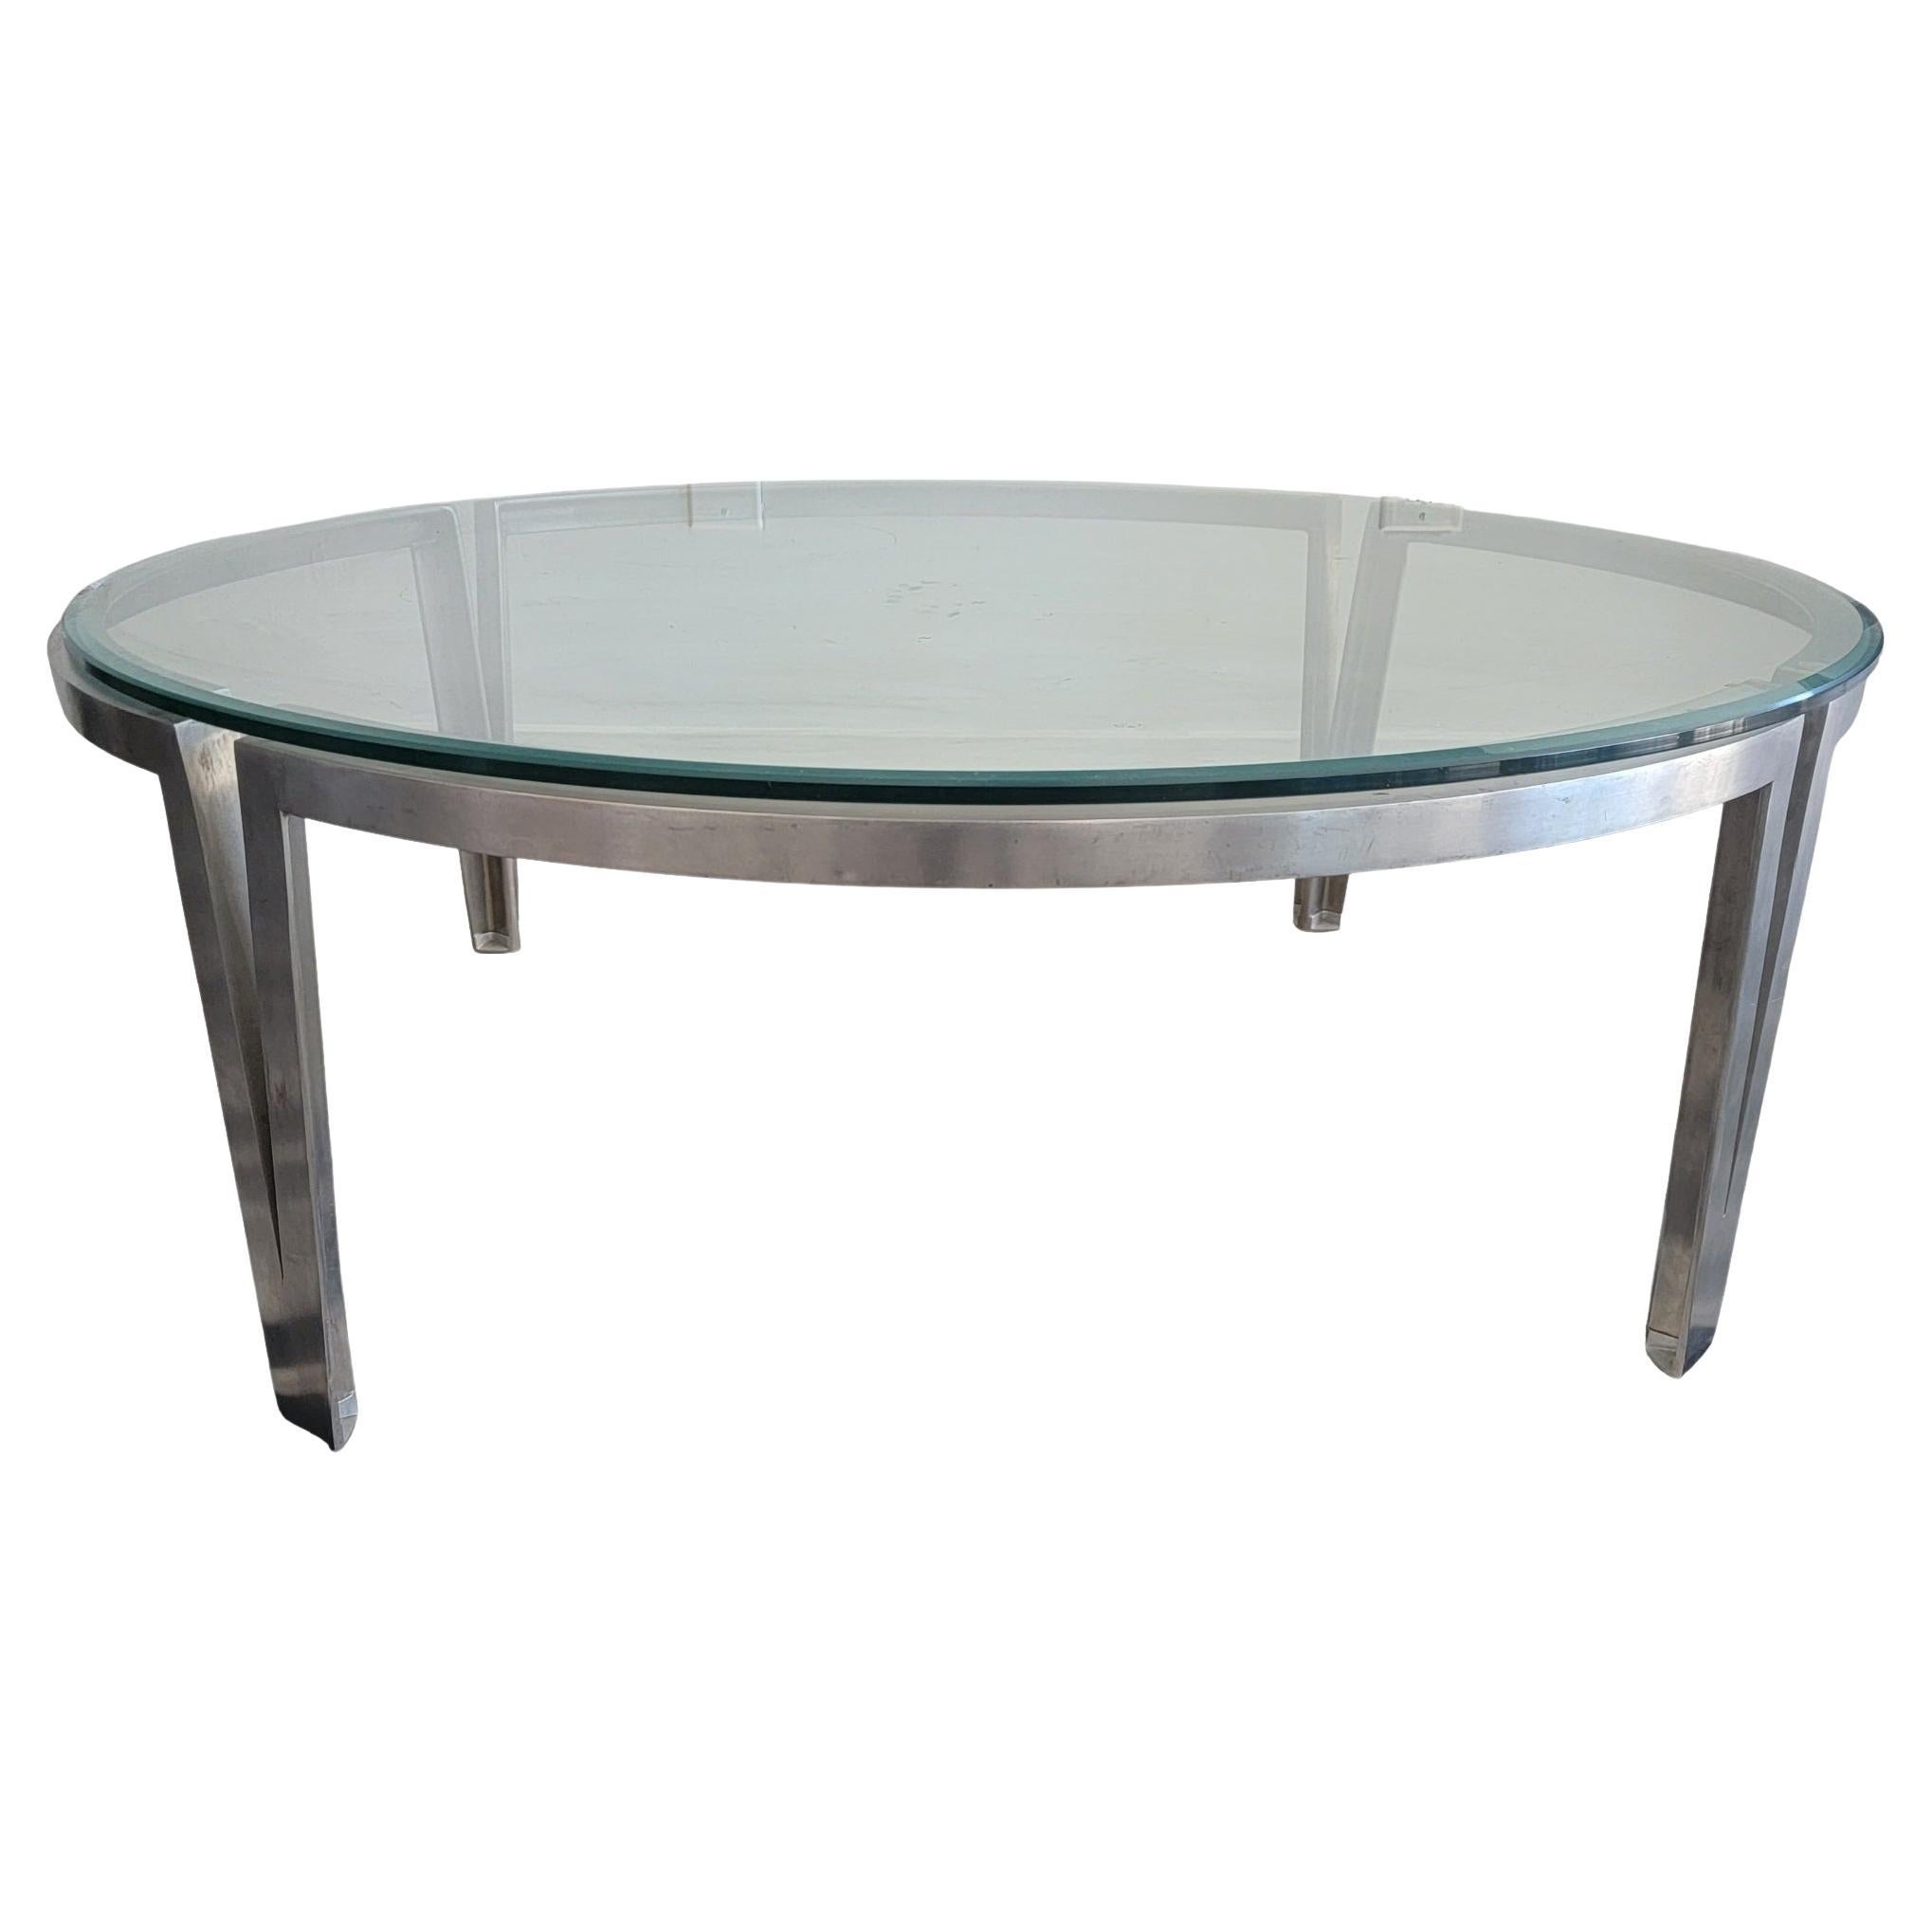 1970s Italian Metal and Glass Coffee Table For Sale